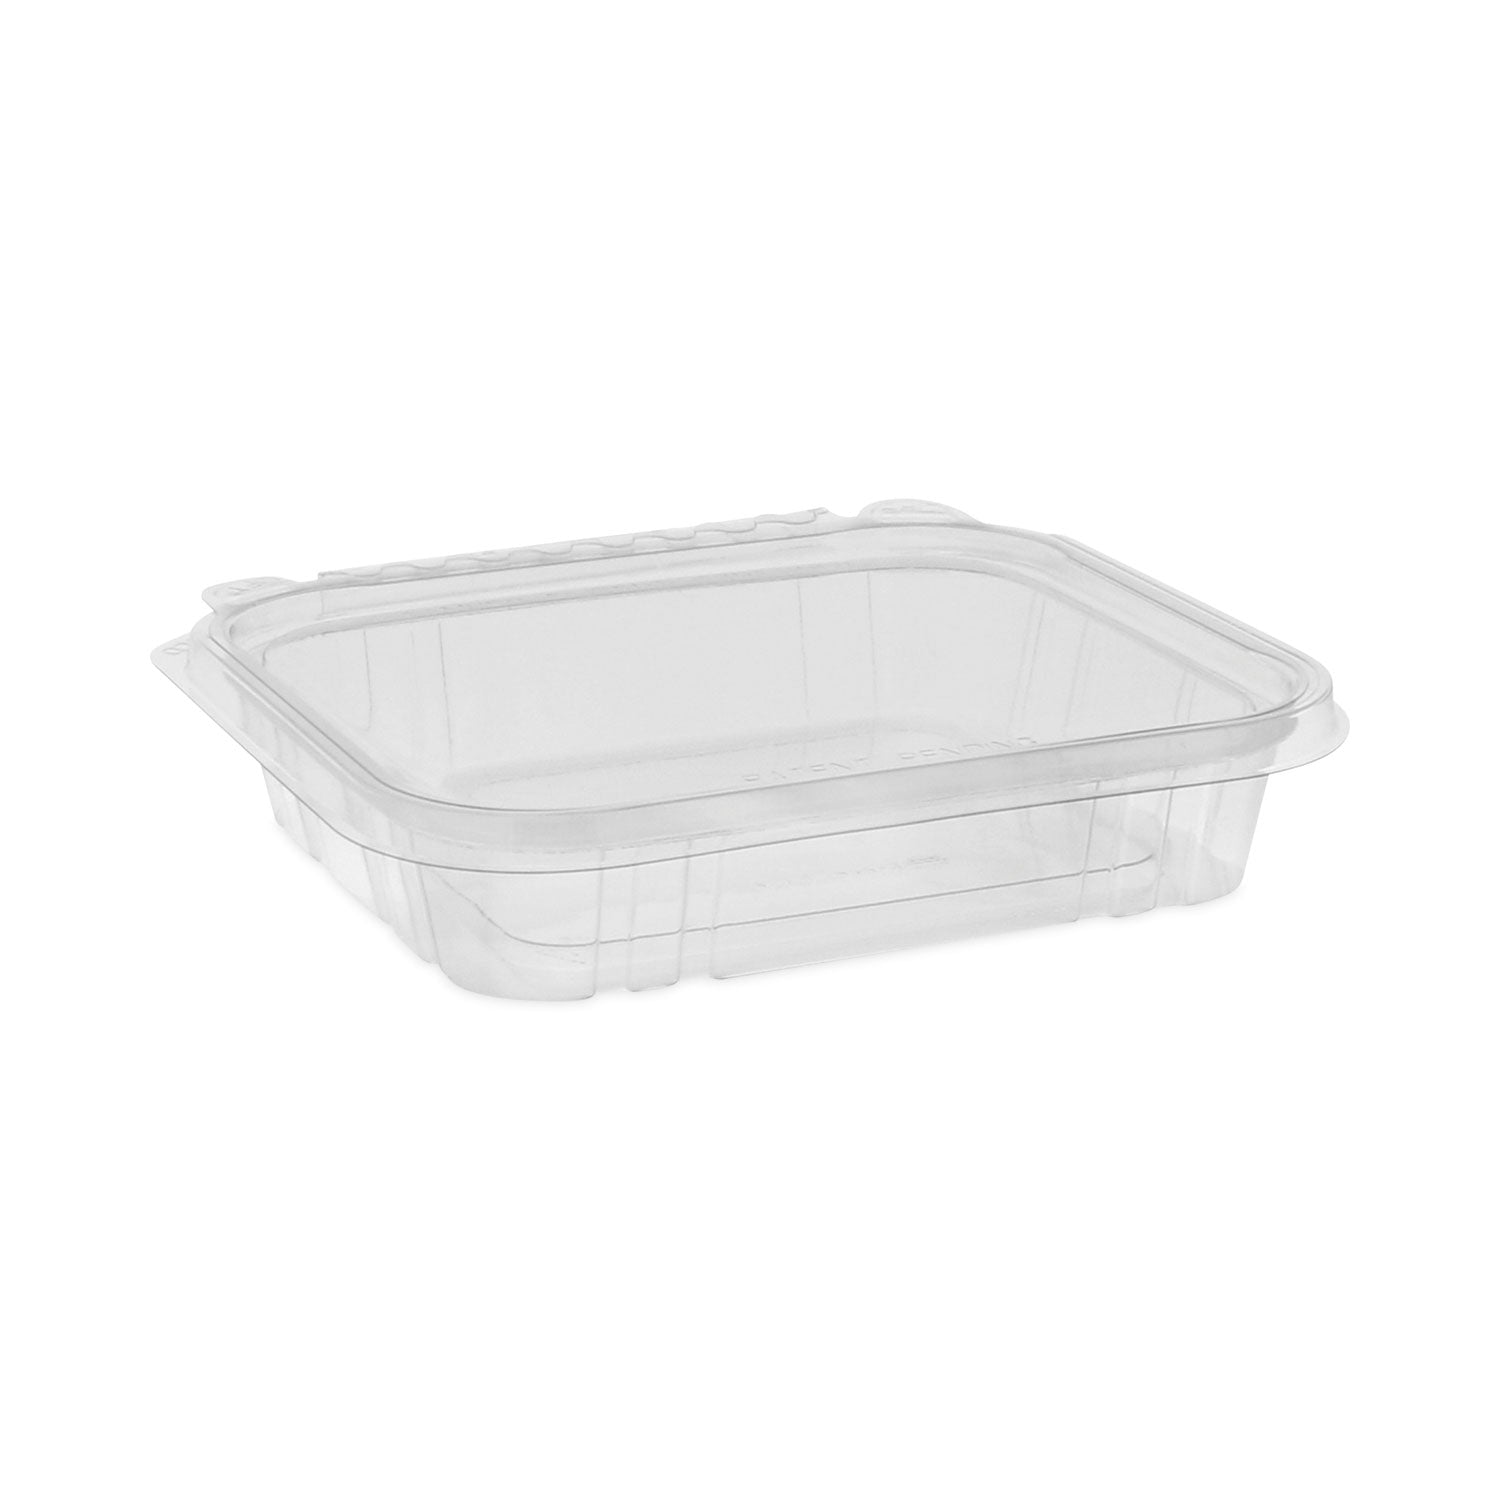 earthchoice-tamper-evident-recycled-hinged-lid-deli-container-16-oz-725-x-638-x-1-clear-plastic-240-carton_pcttehl7x616s - 1